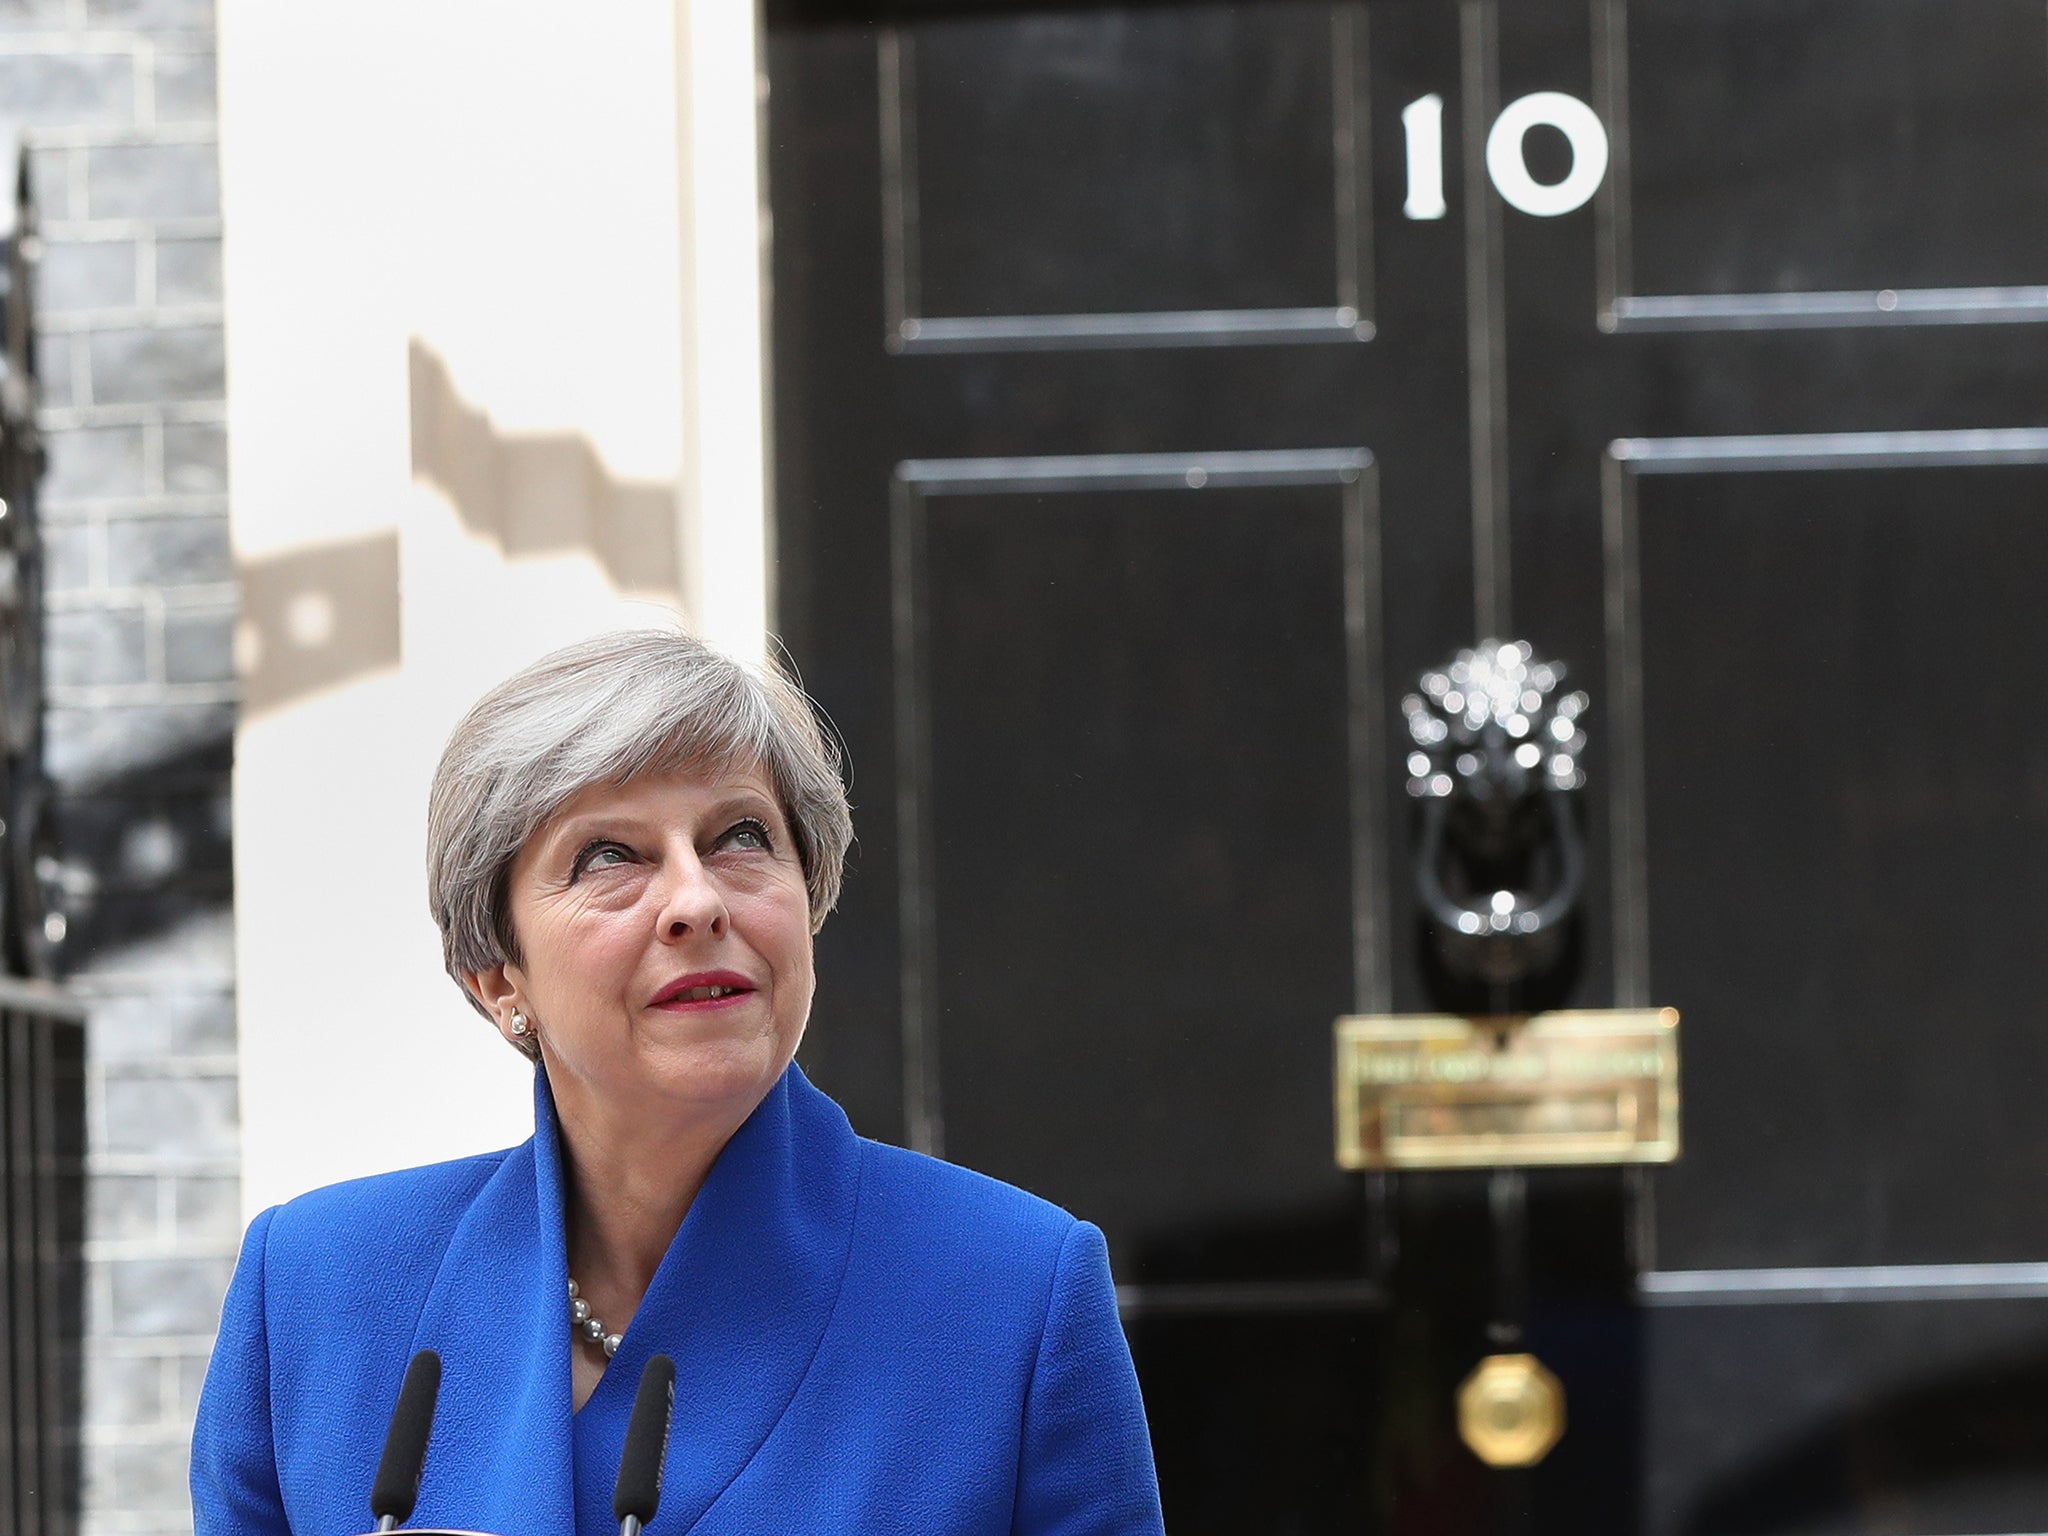 Theresa May no longer has the majority she wanted to move forward with Brexit negotiations